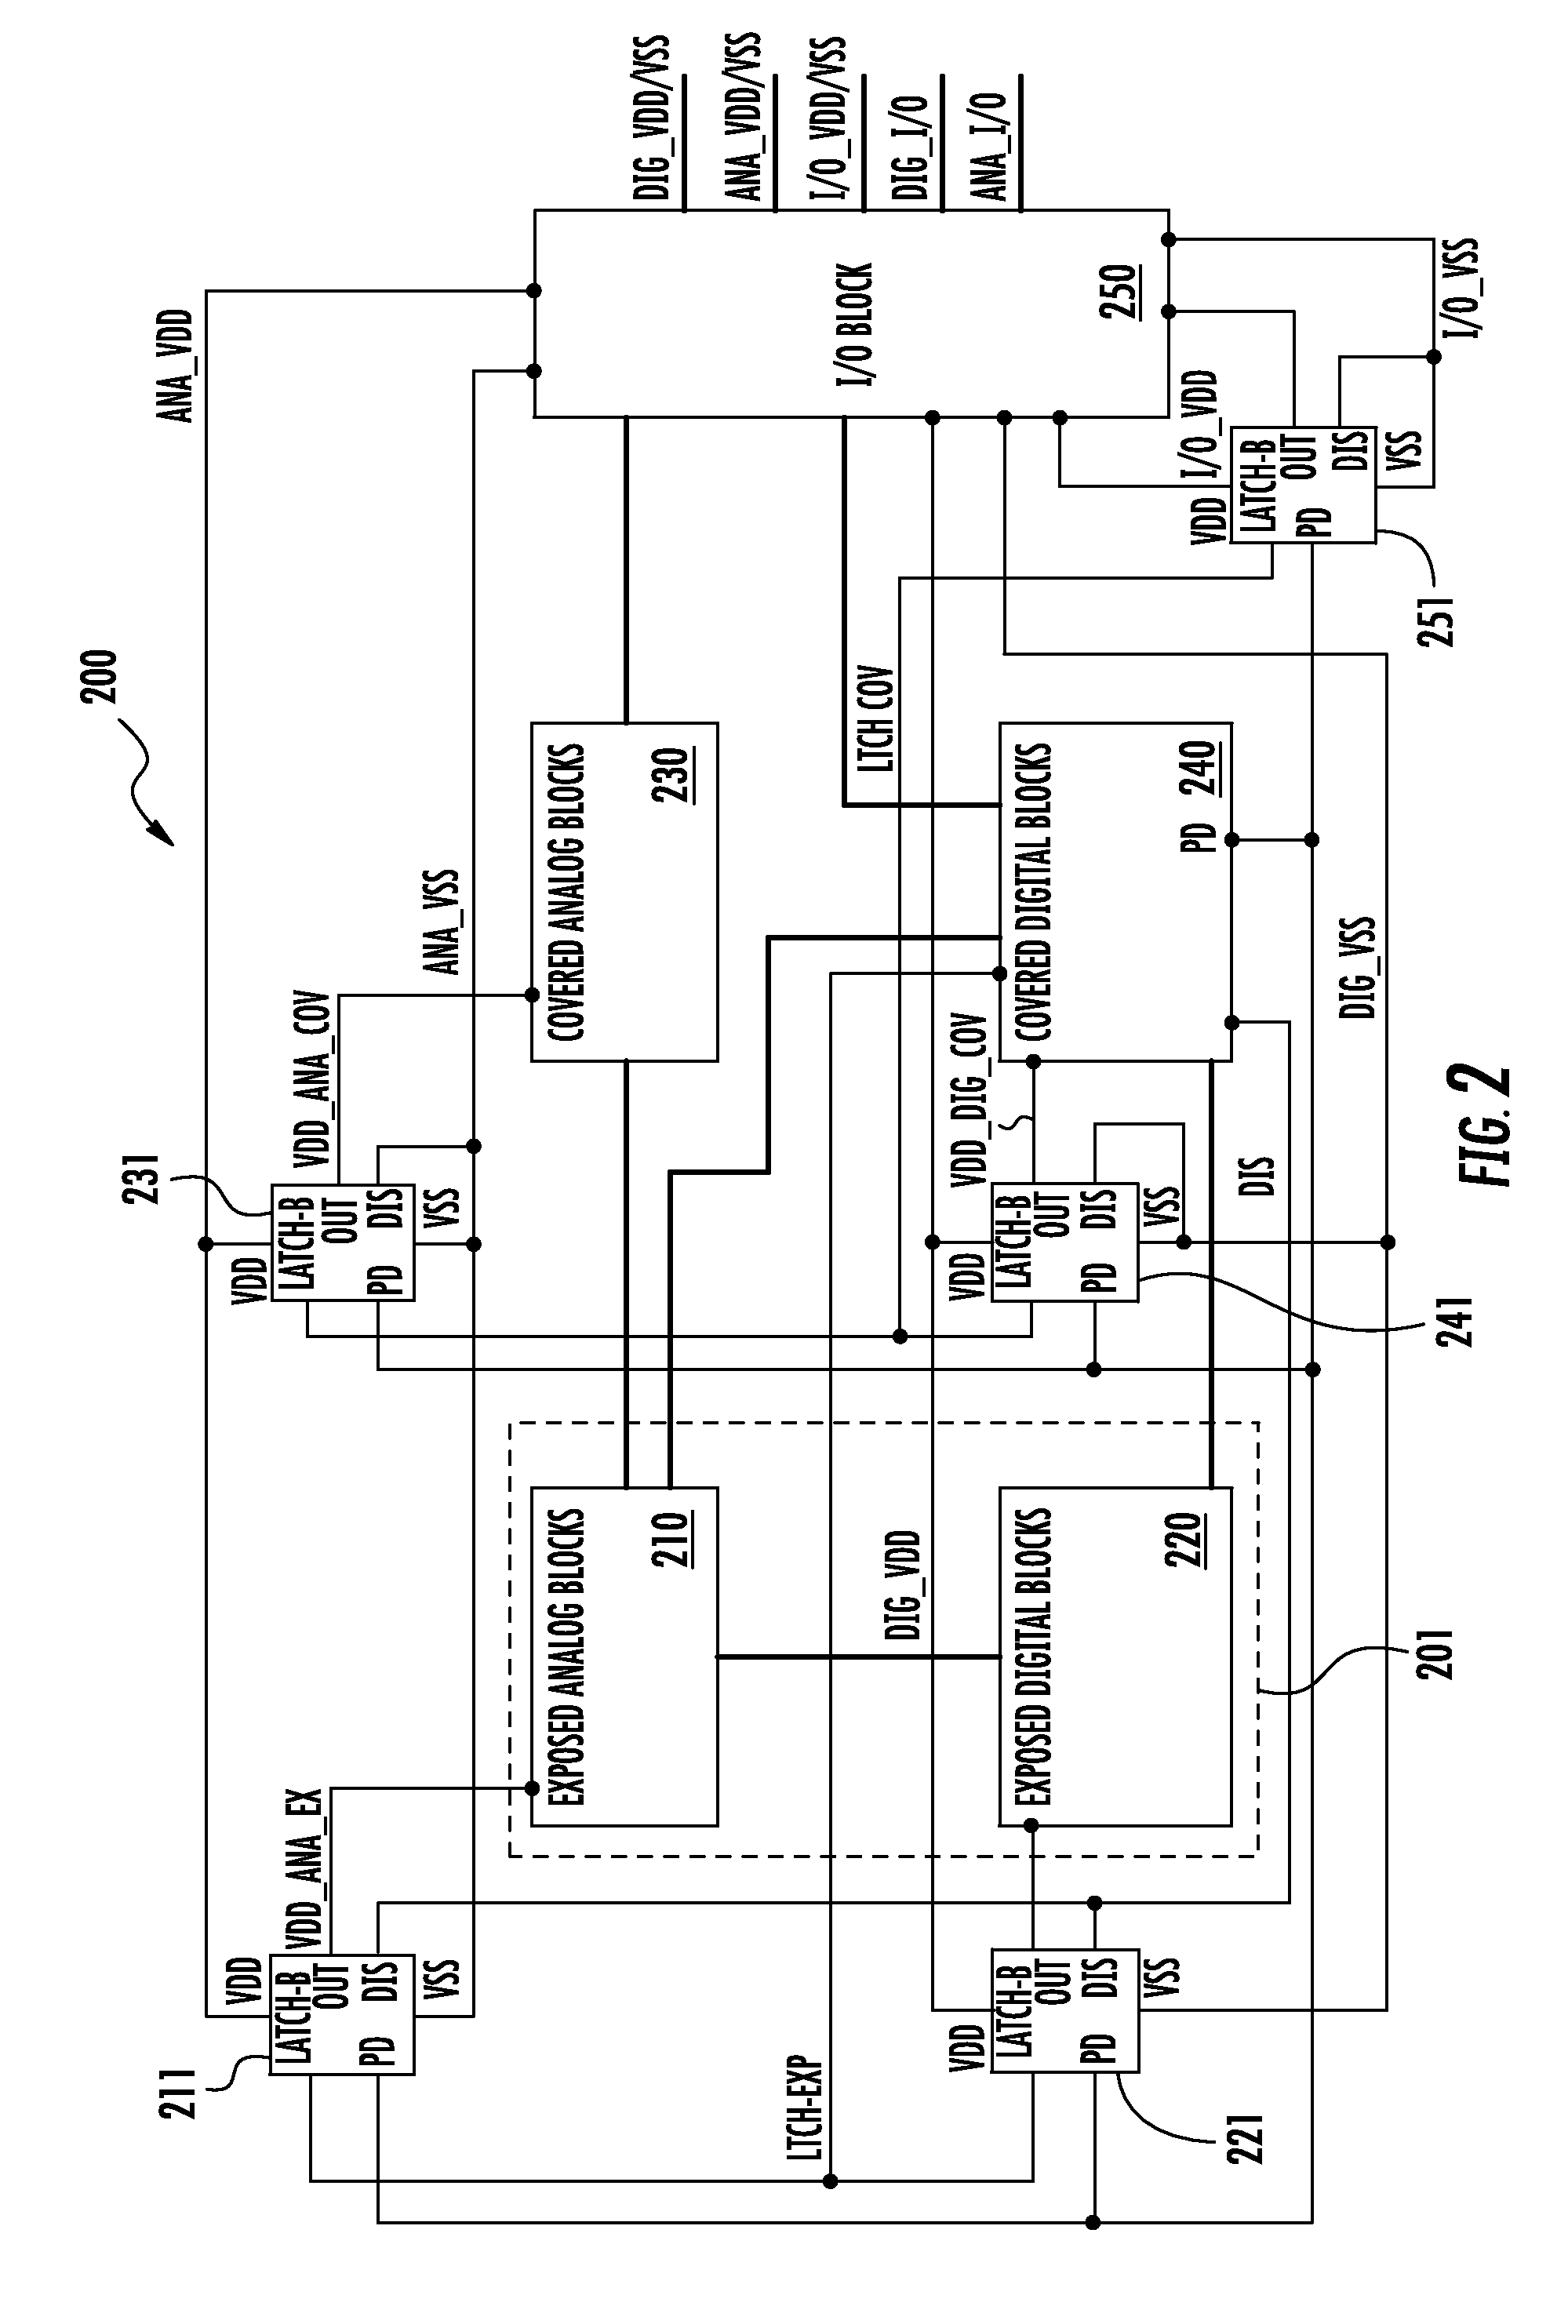 System for and method of protecting an integrated circuit from over currents